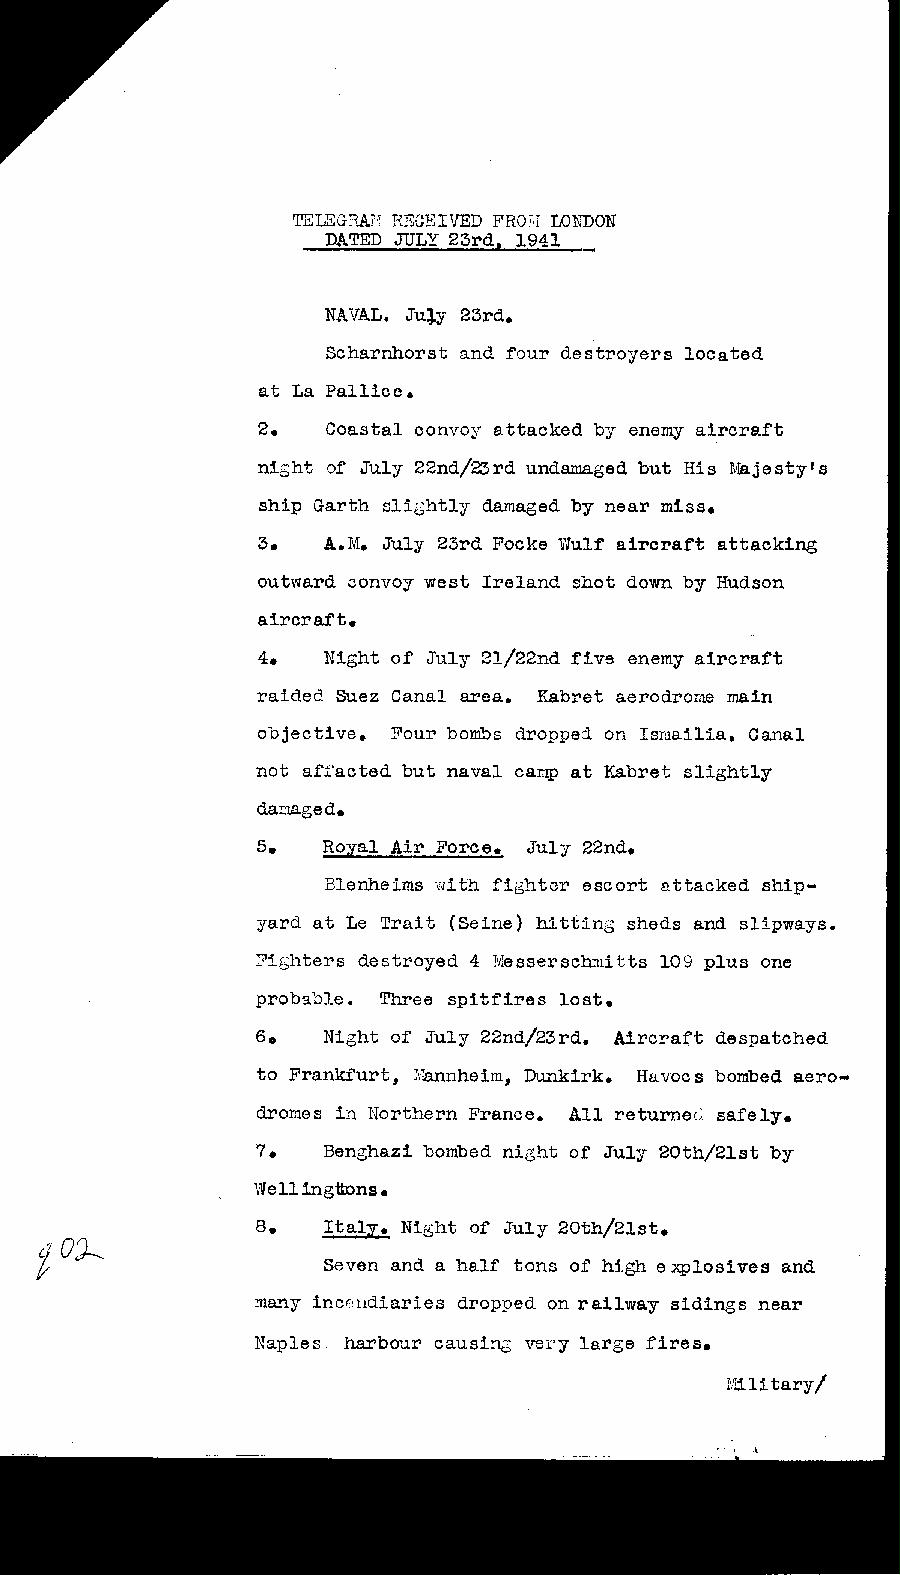 [a322q02.jpg] - Report on military situation 7/23/41